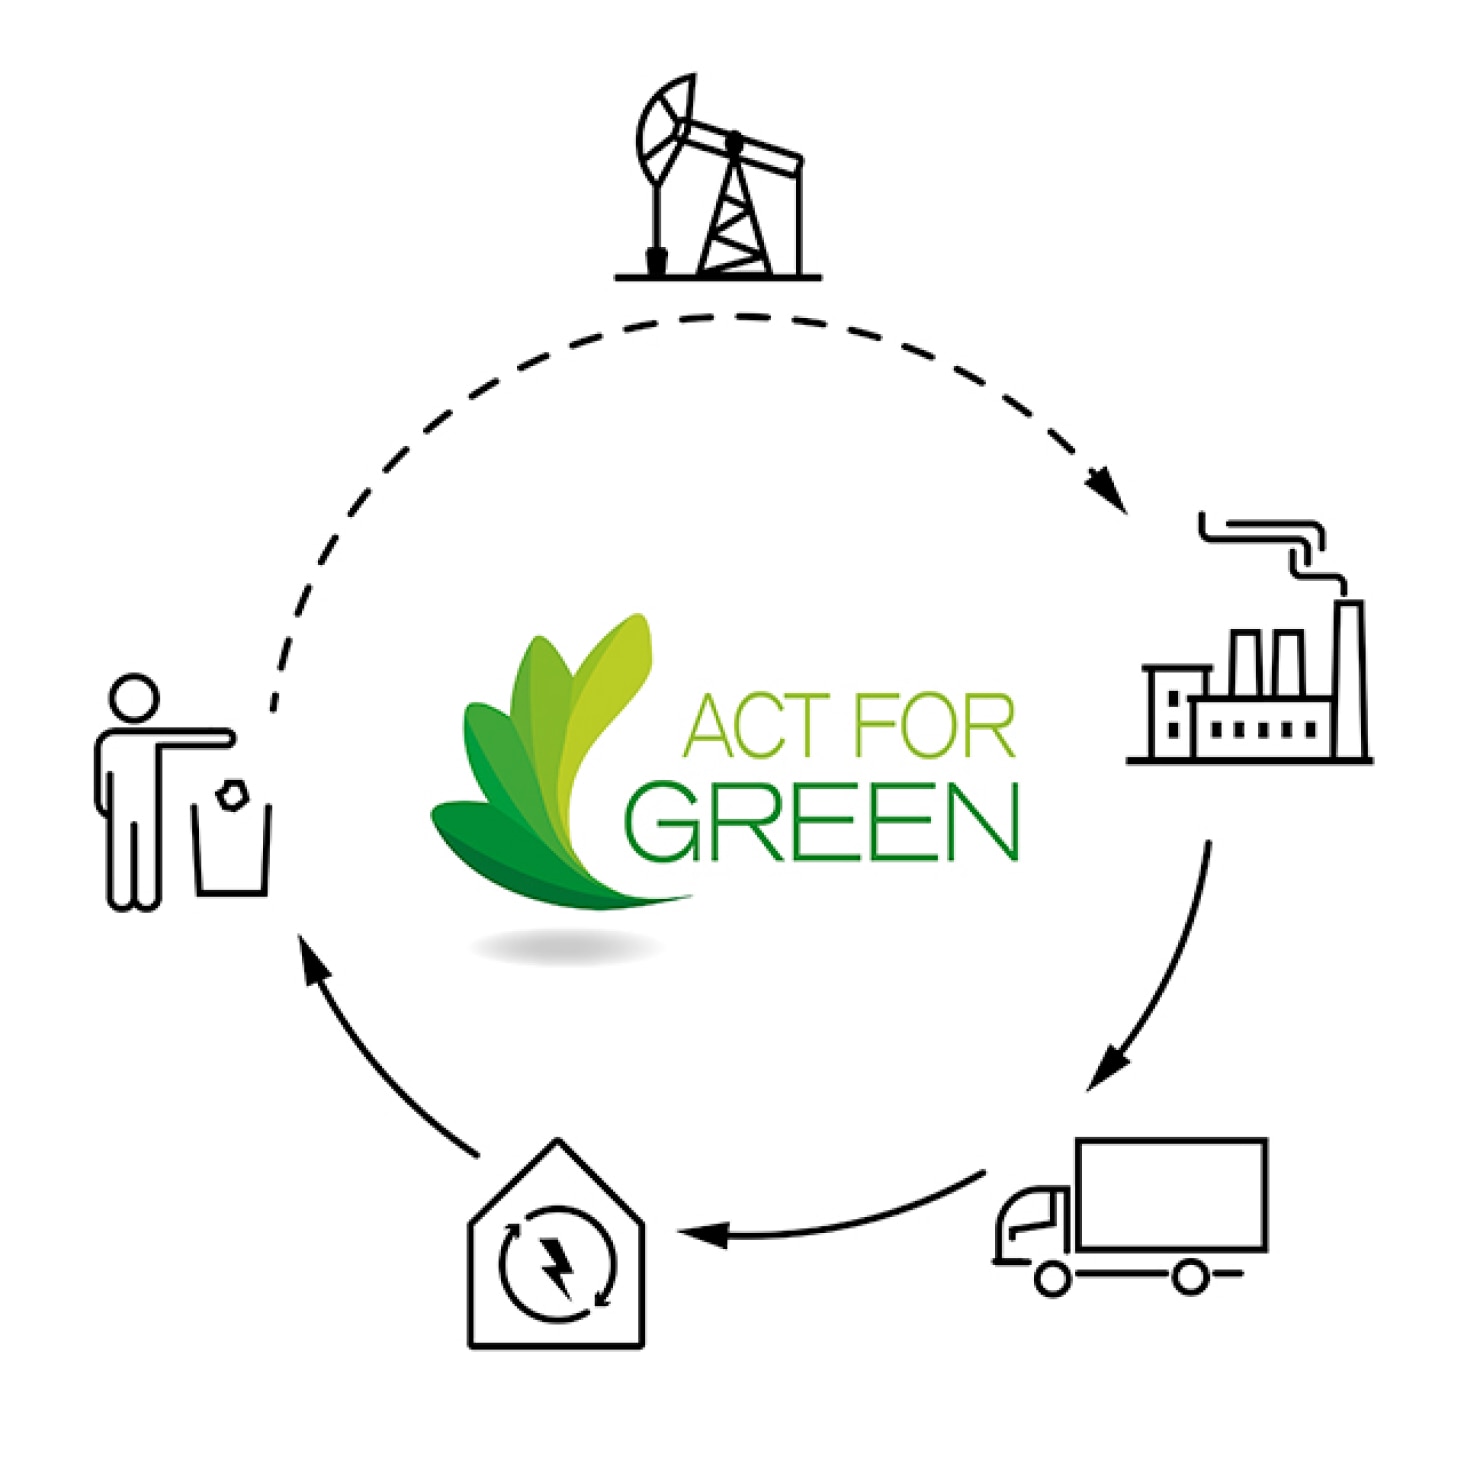 Act For Green cycle